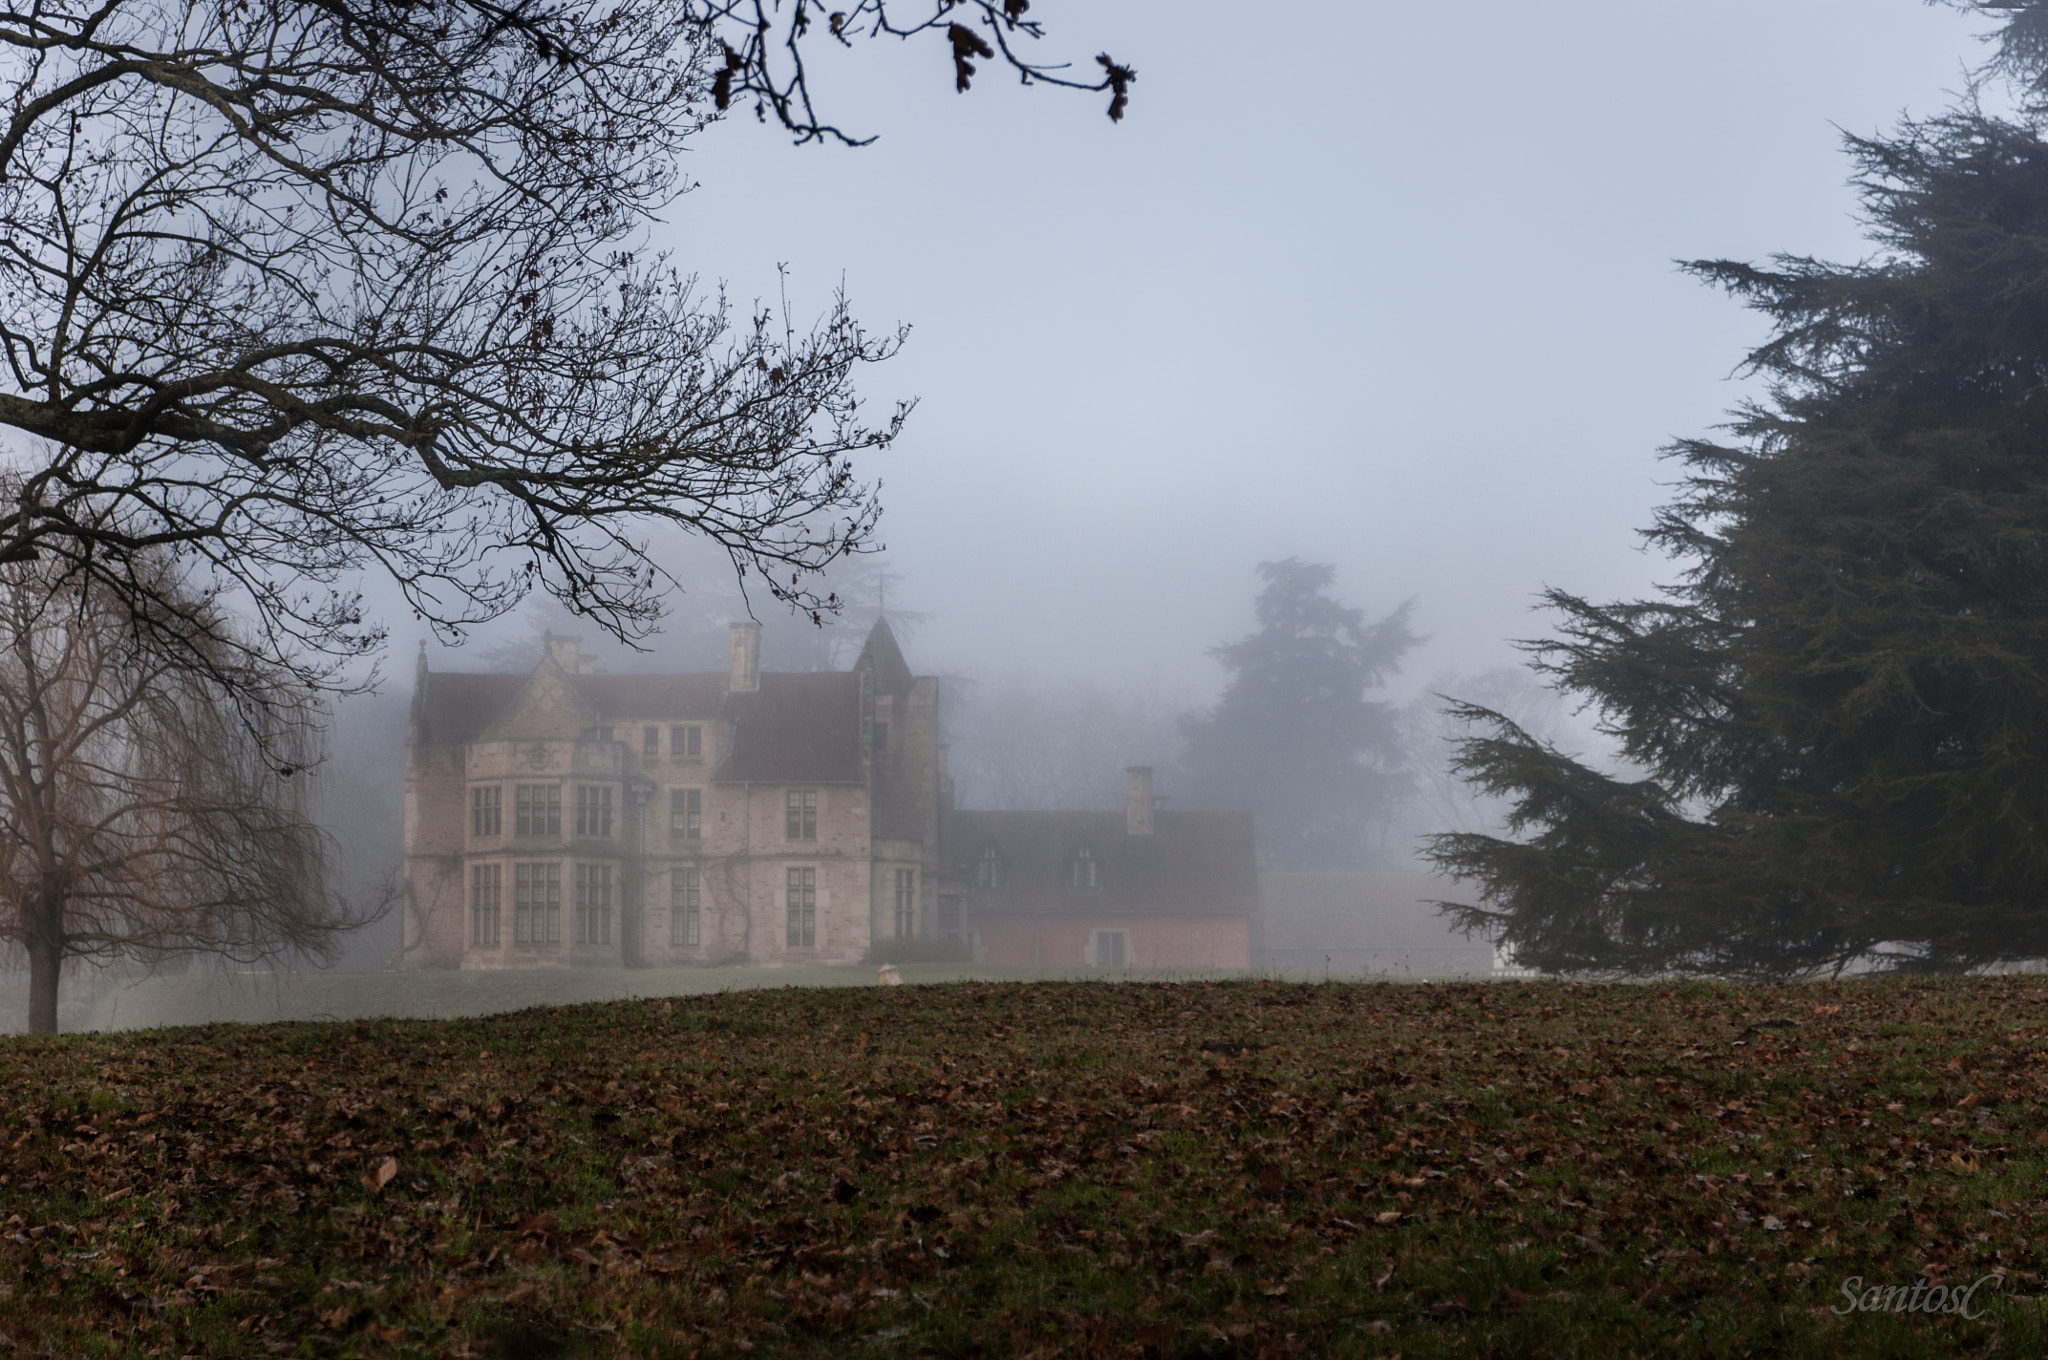 Nikon D90 + Sigma 17-70mm F2.8-4 DC Macro OS HSM | C sample photo. A foggy day in cantabria (spain) photography